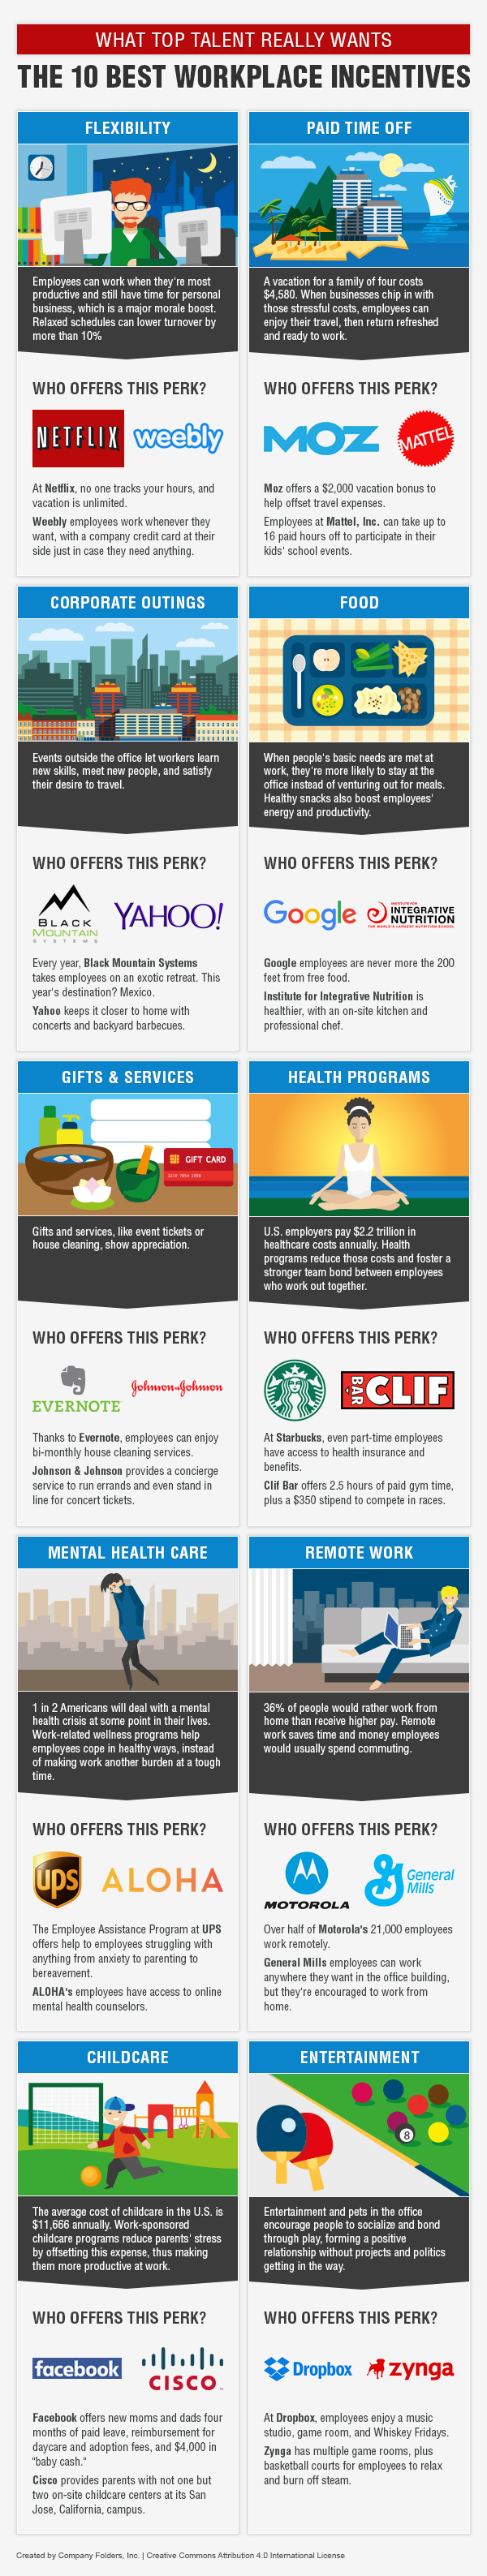 10 Employee Perks To Attract Top Talent- Infographic